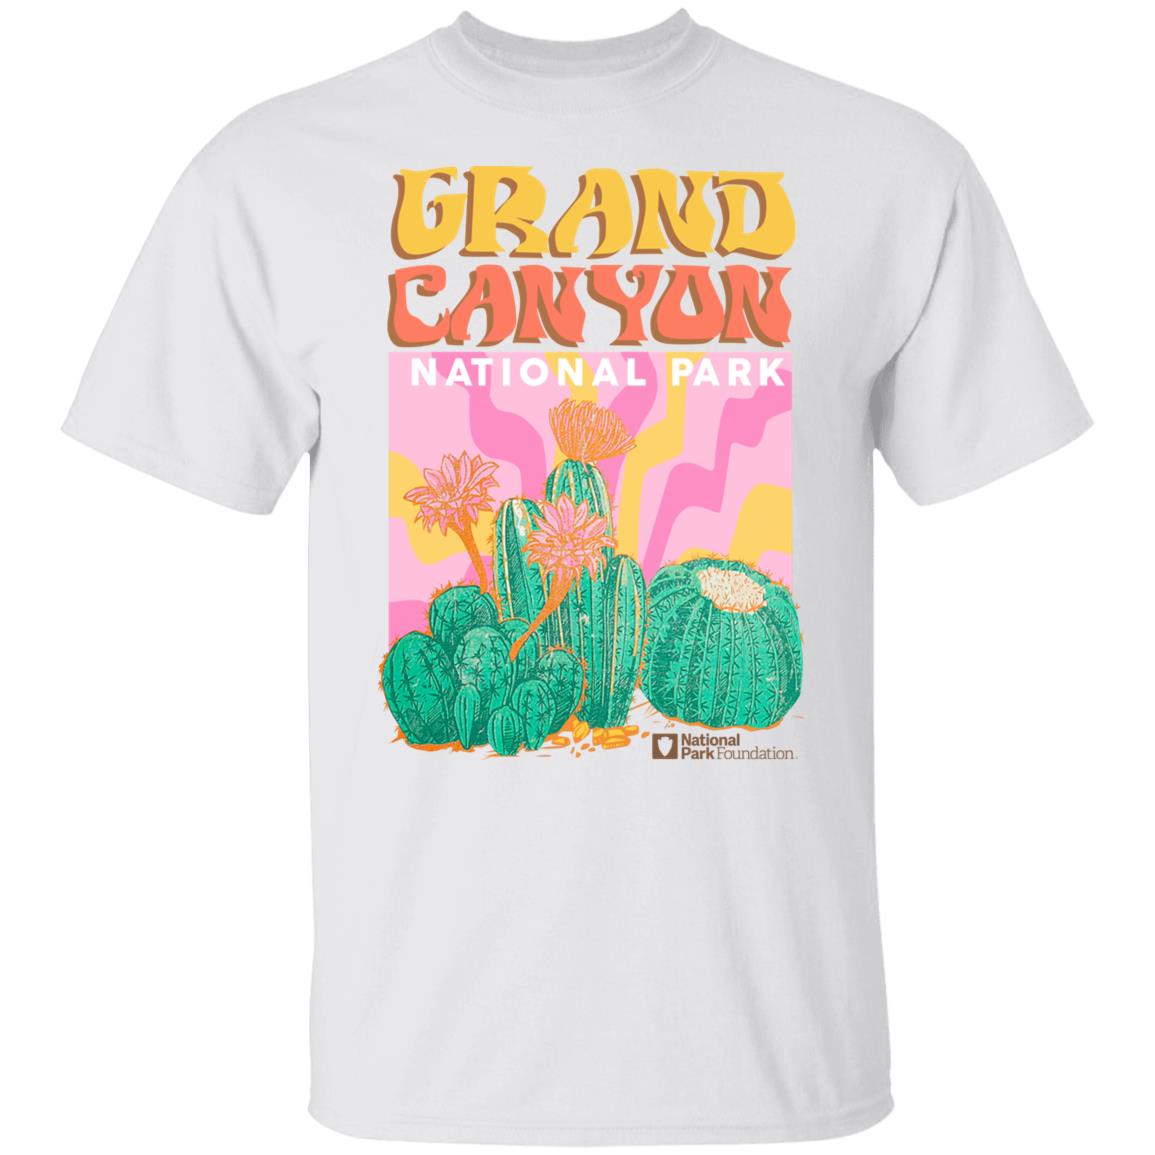 Cool Bad bunny shirts: Show Your Personality插图